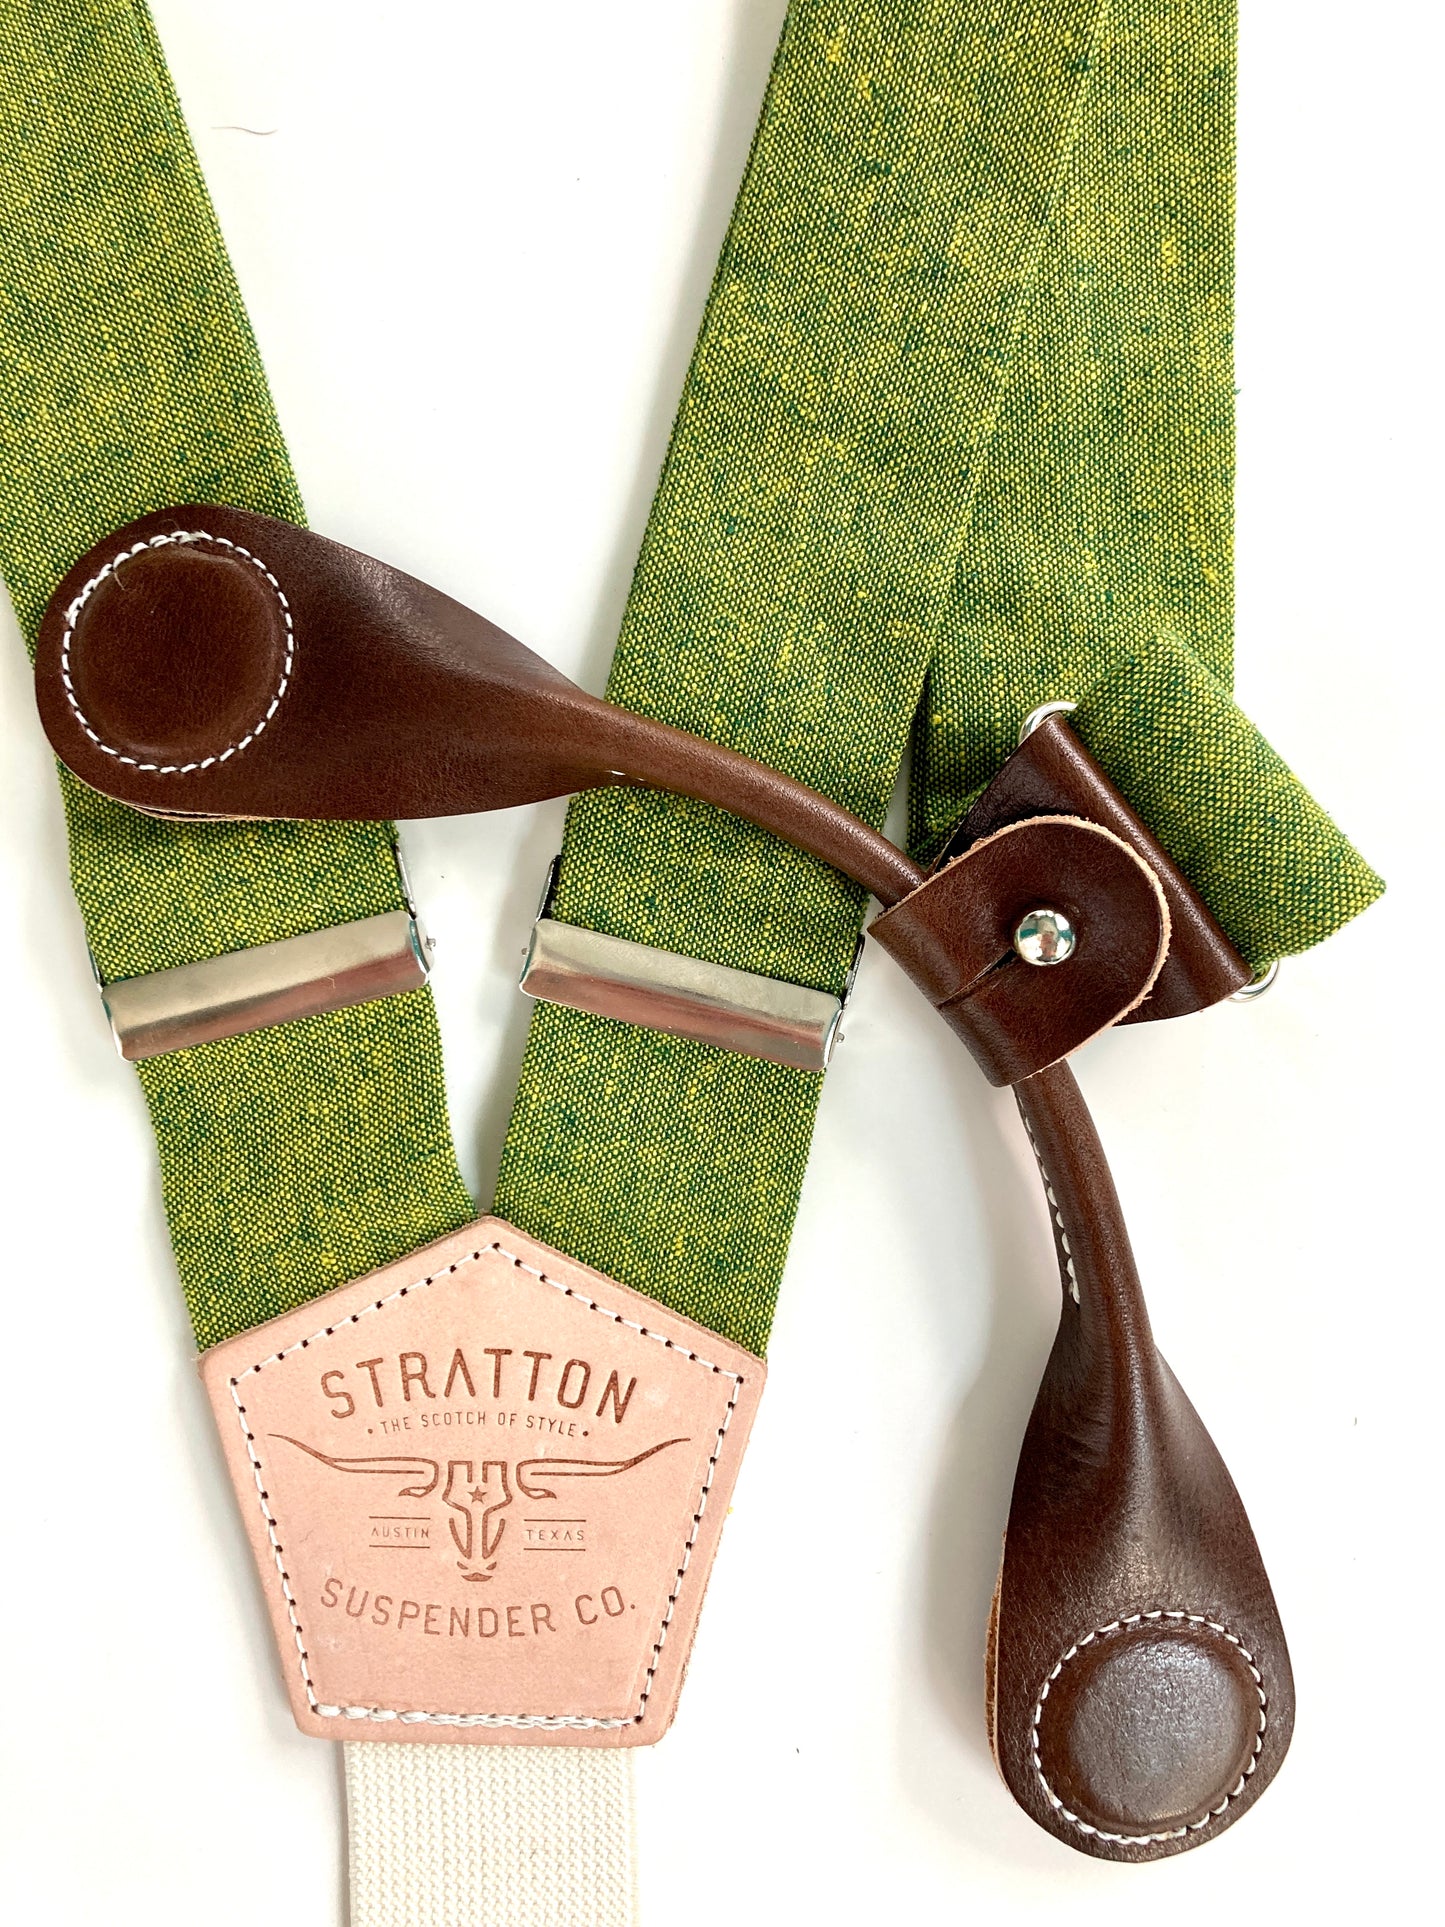 Stratton Suspender Co. features the Palm green with yellow woven threaded linen suspenders on veg tan shoulder leather with cream colored elastic back strap for the Fall 2022 suspenders collection Magnetic Stratton Suspender clasps in Chocolate Pontedero Italian leather hand-picked by Stratton Suspender Co.